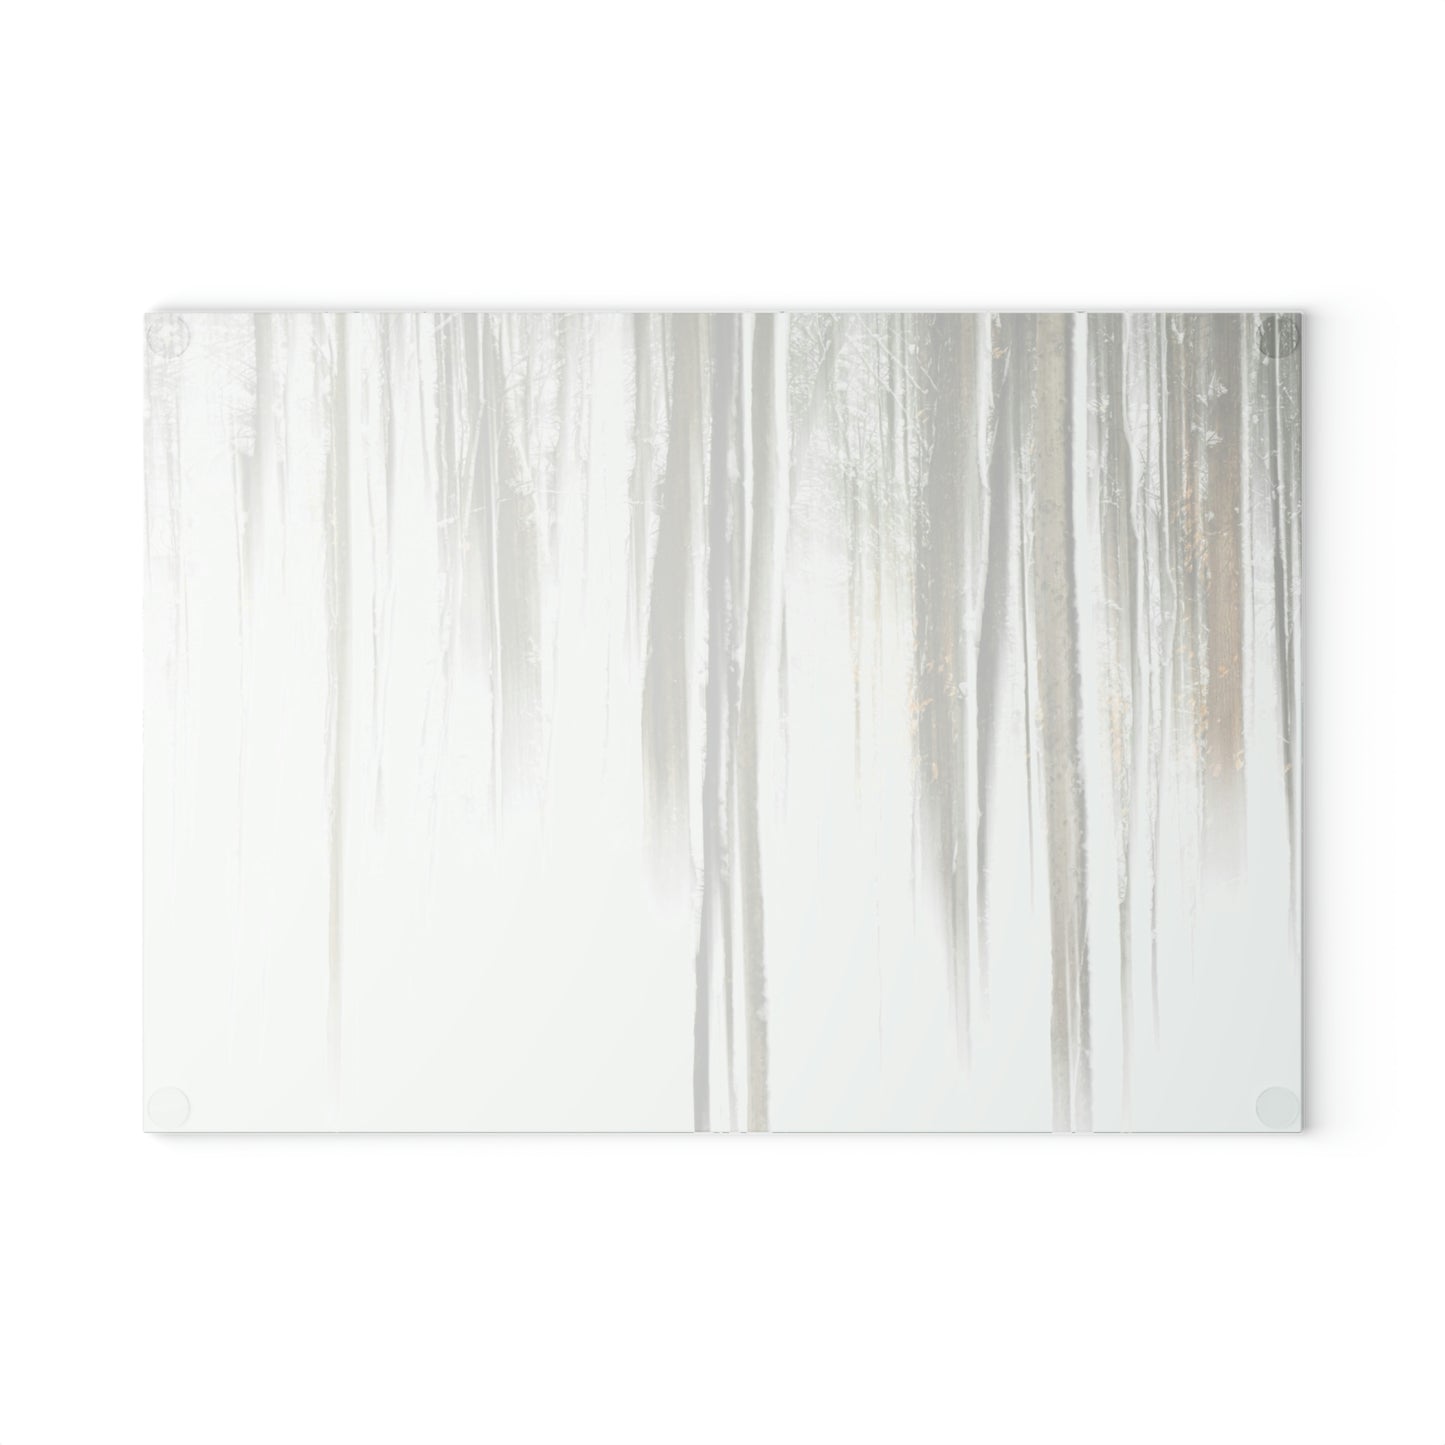 Glass Cutting Board - Abstract Winter Woods